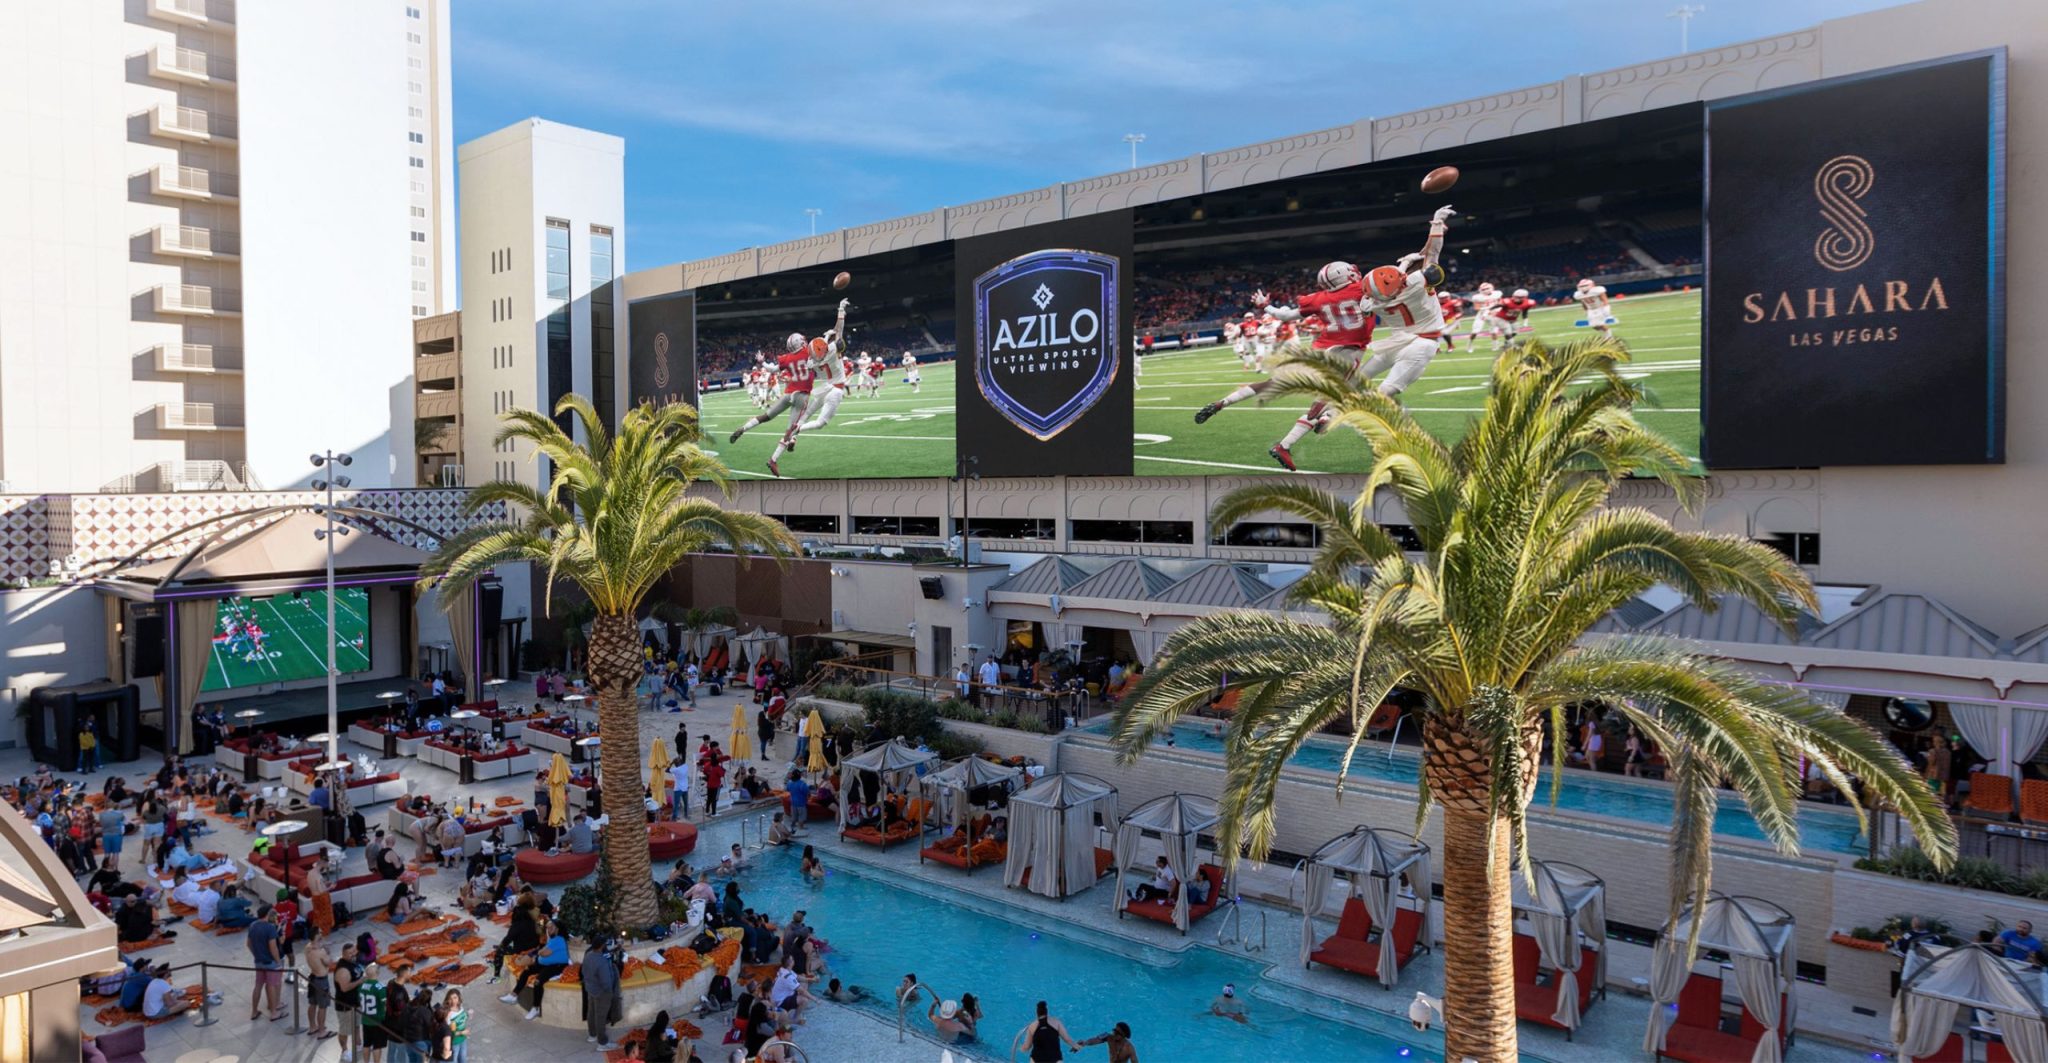 AZILO las Vegas showing pro football on the main screens. Shows the pool space full of people.